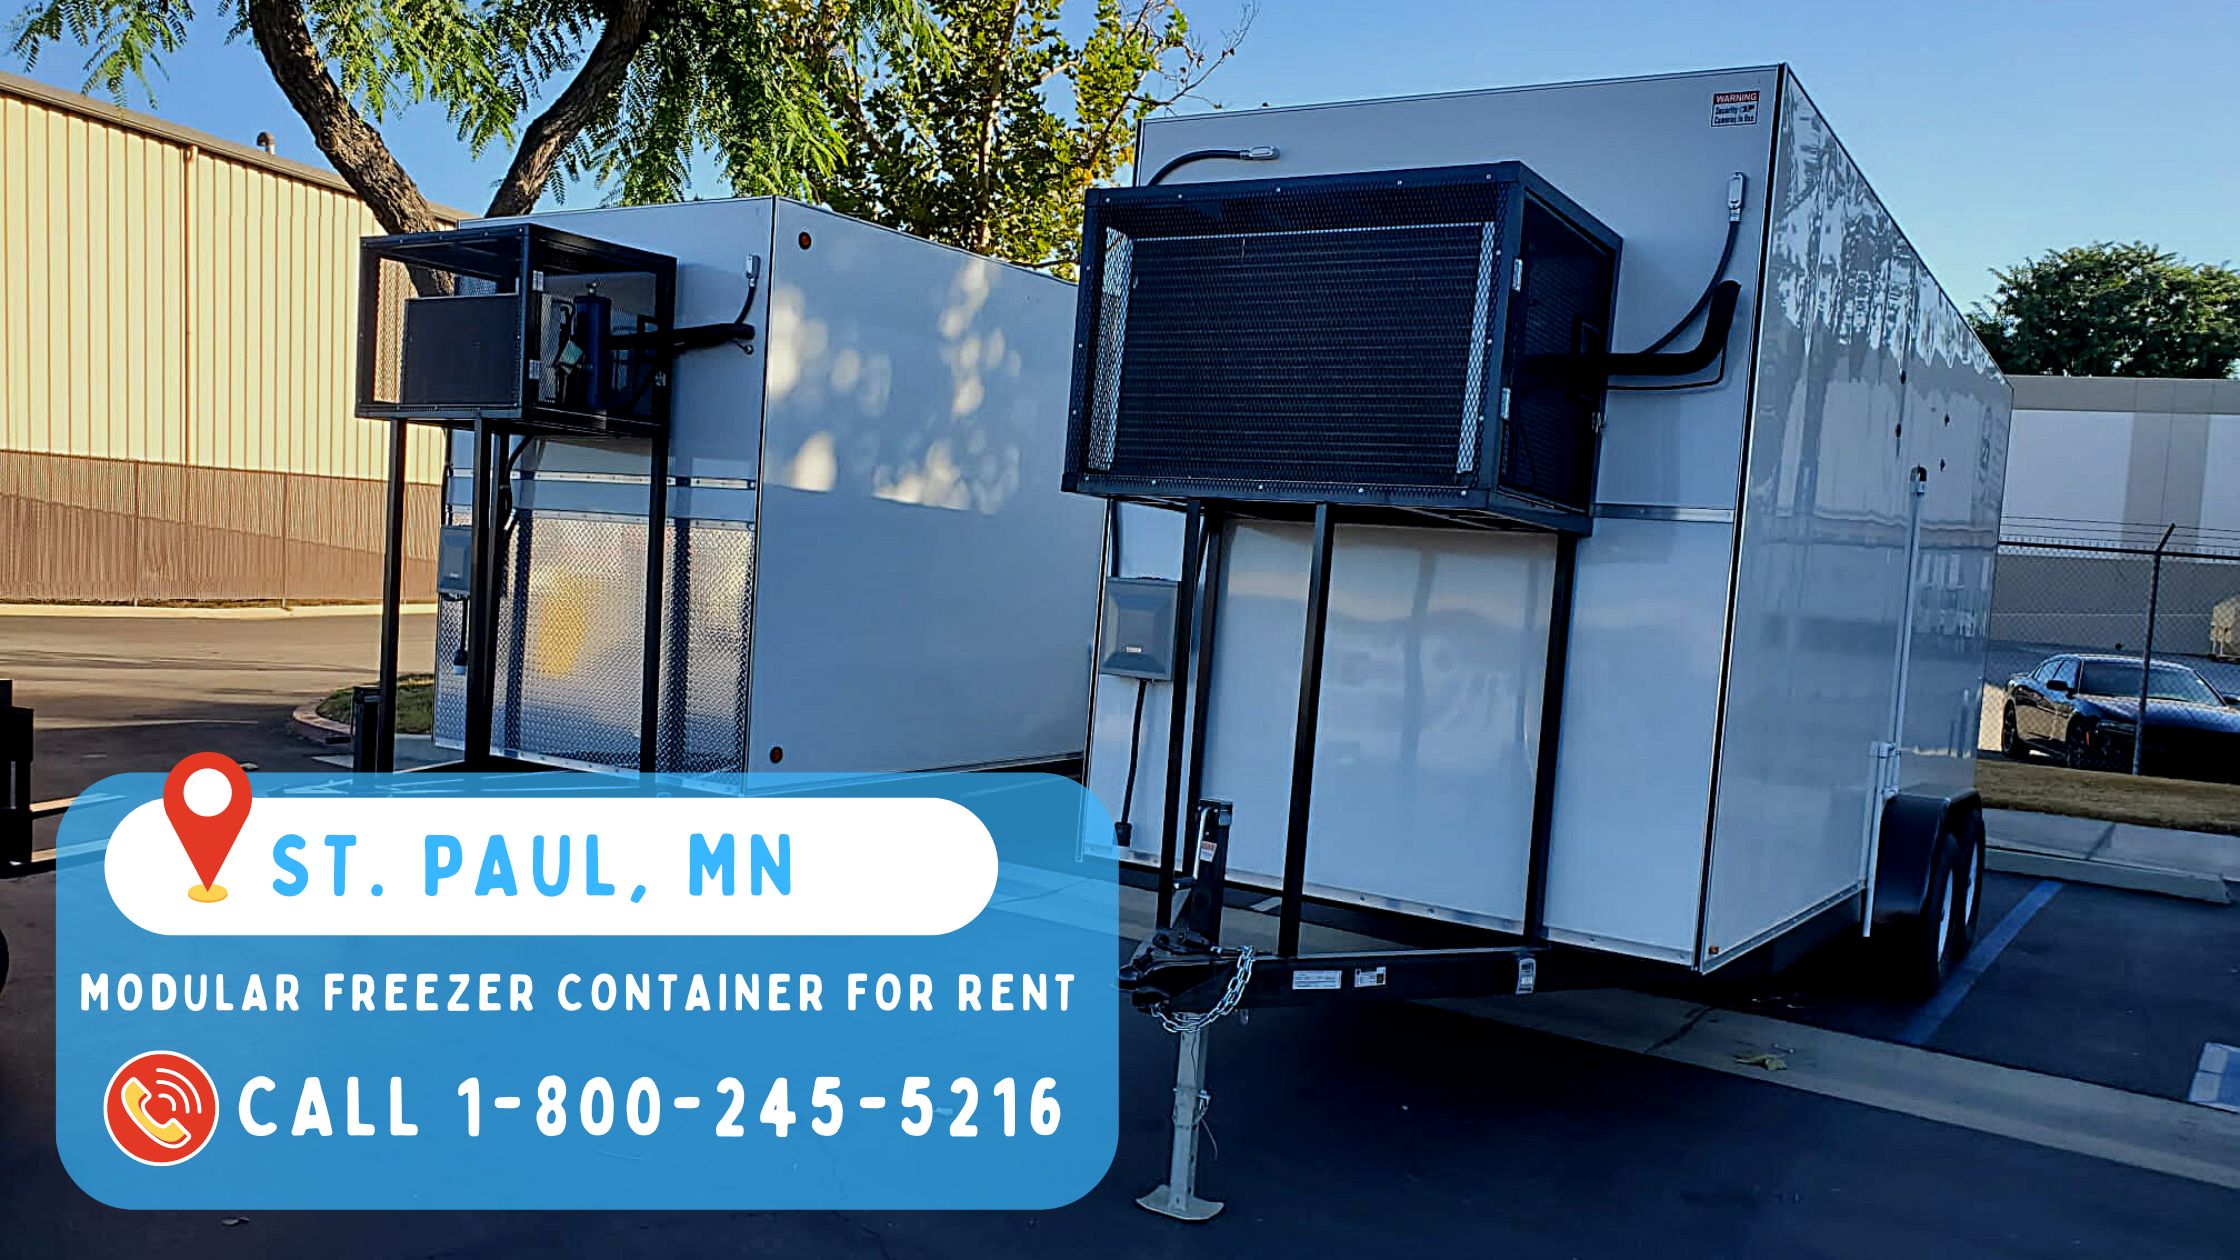 Modular freezer container for rent in Saint Paul, MN